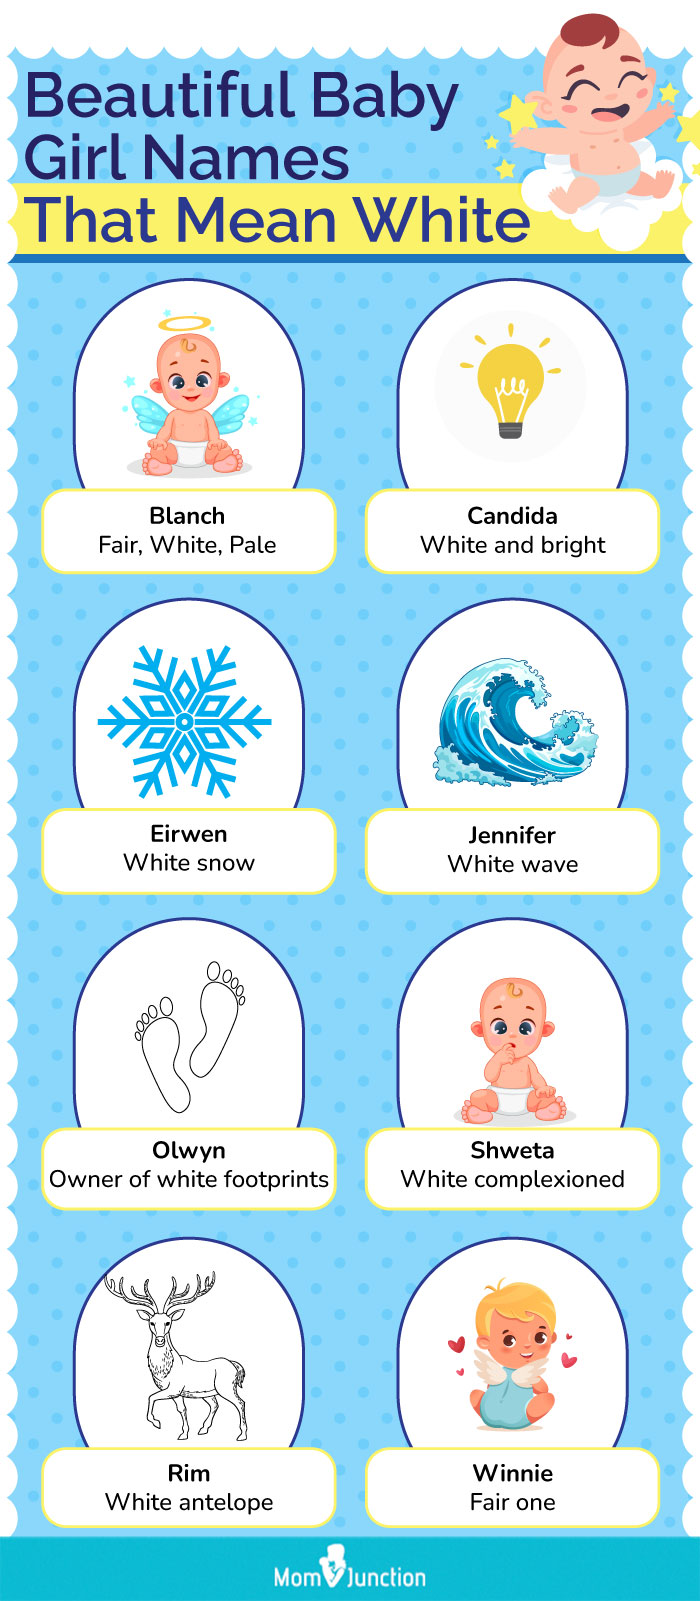 beautiful baby girl names that mean white (infographic)